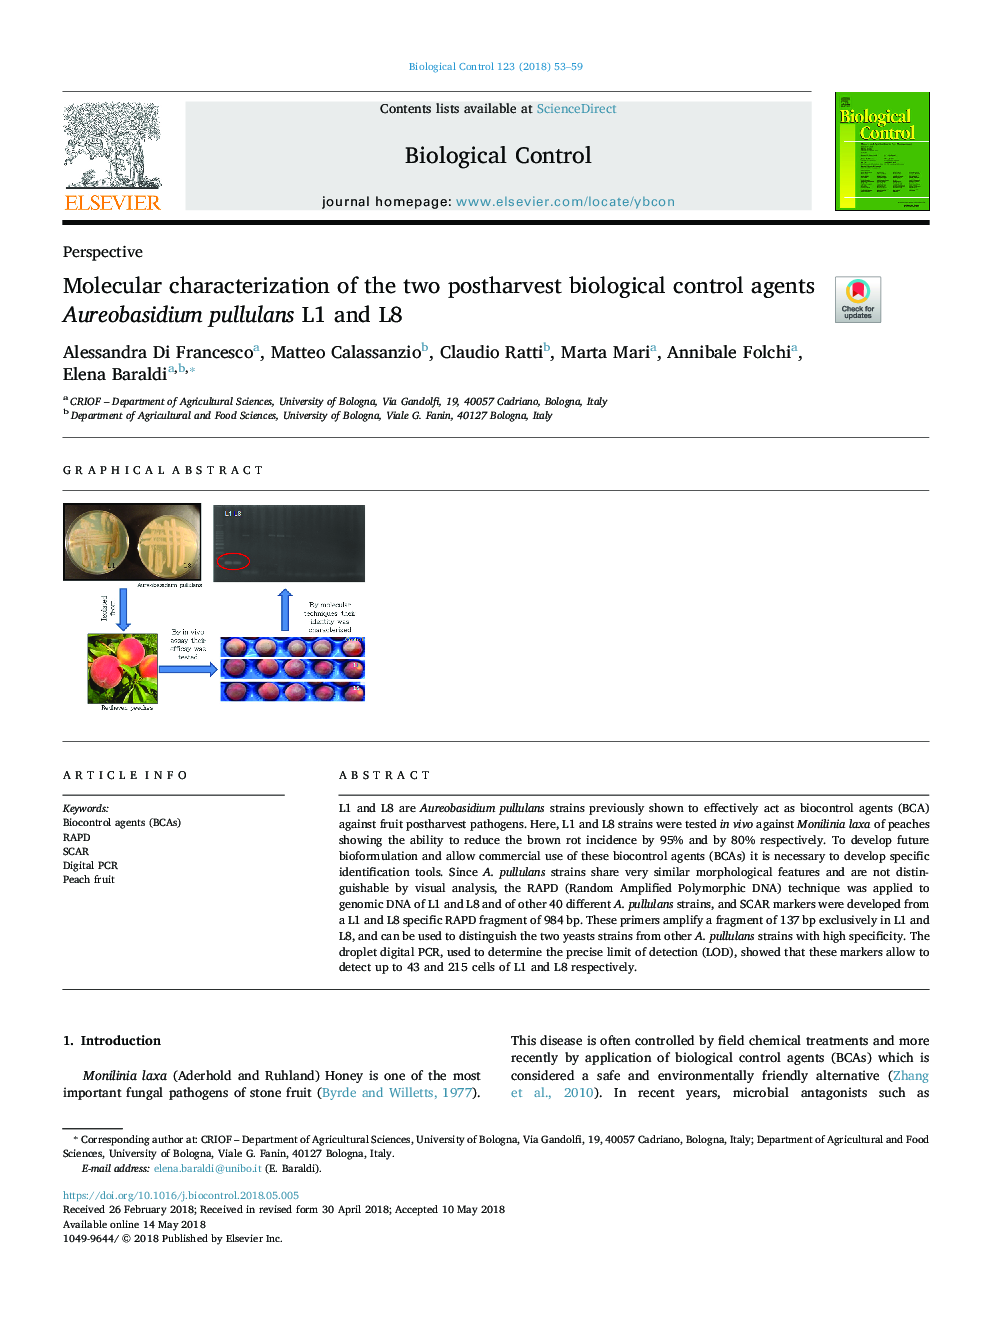 Molecular characterization of the two postharvest biological control agents Aureobasidium pullulans L1 and L8